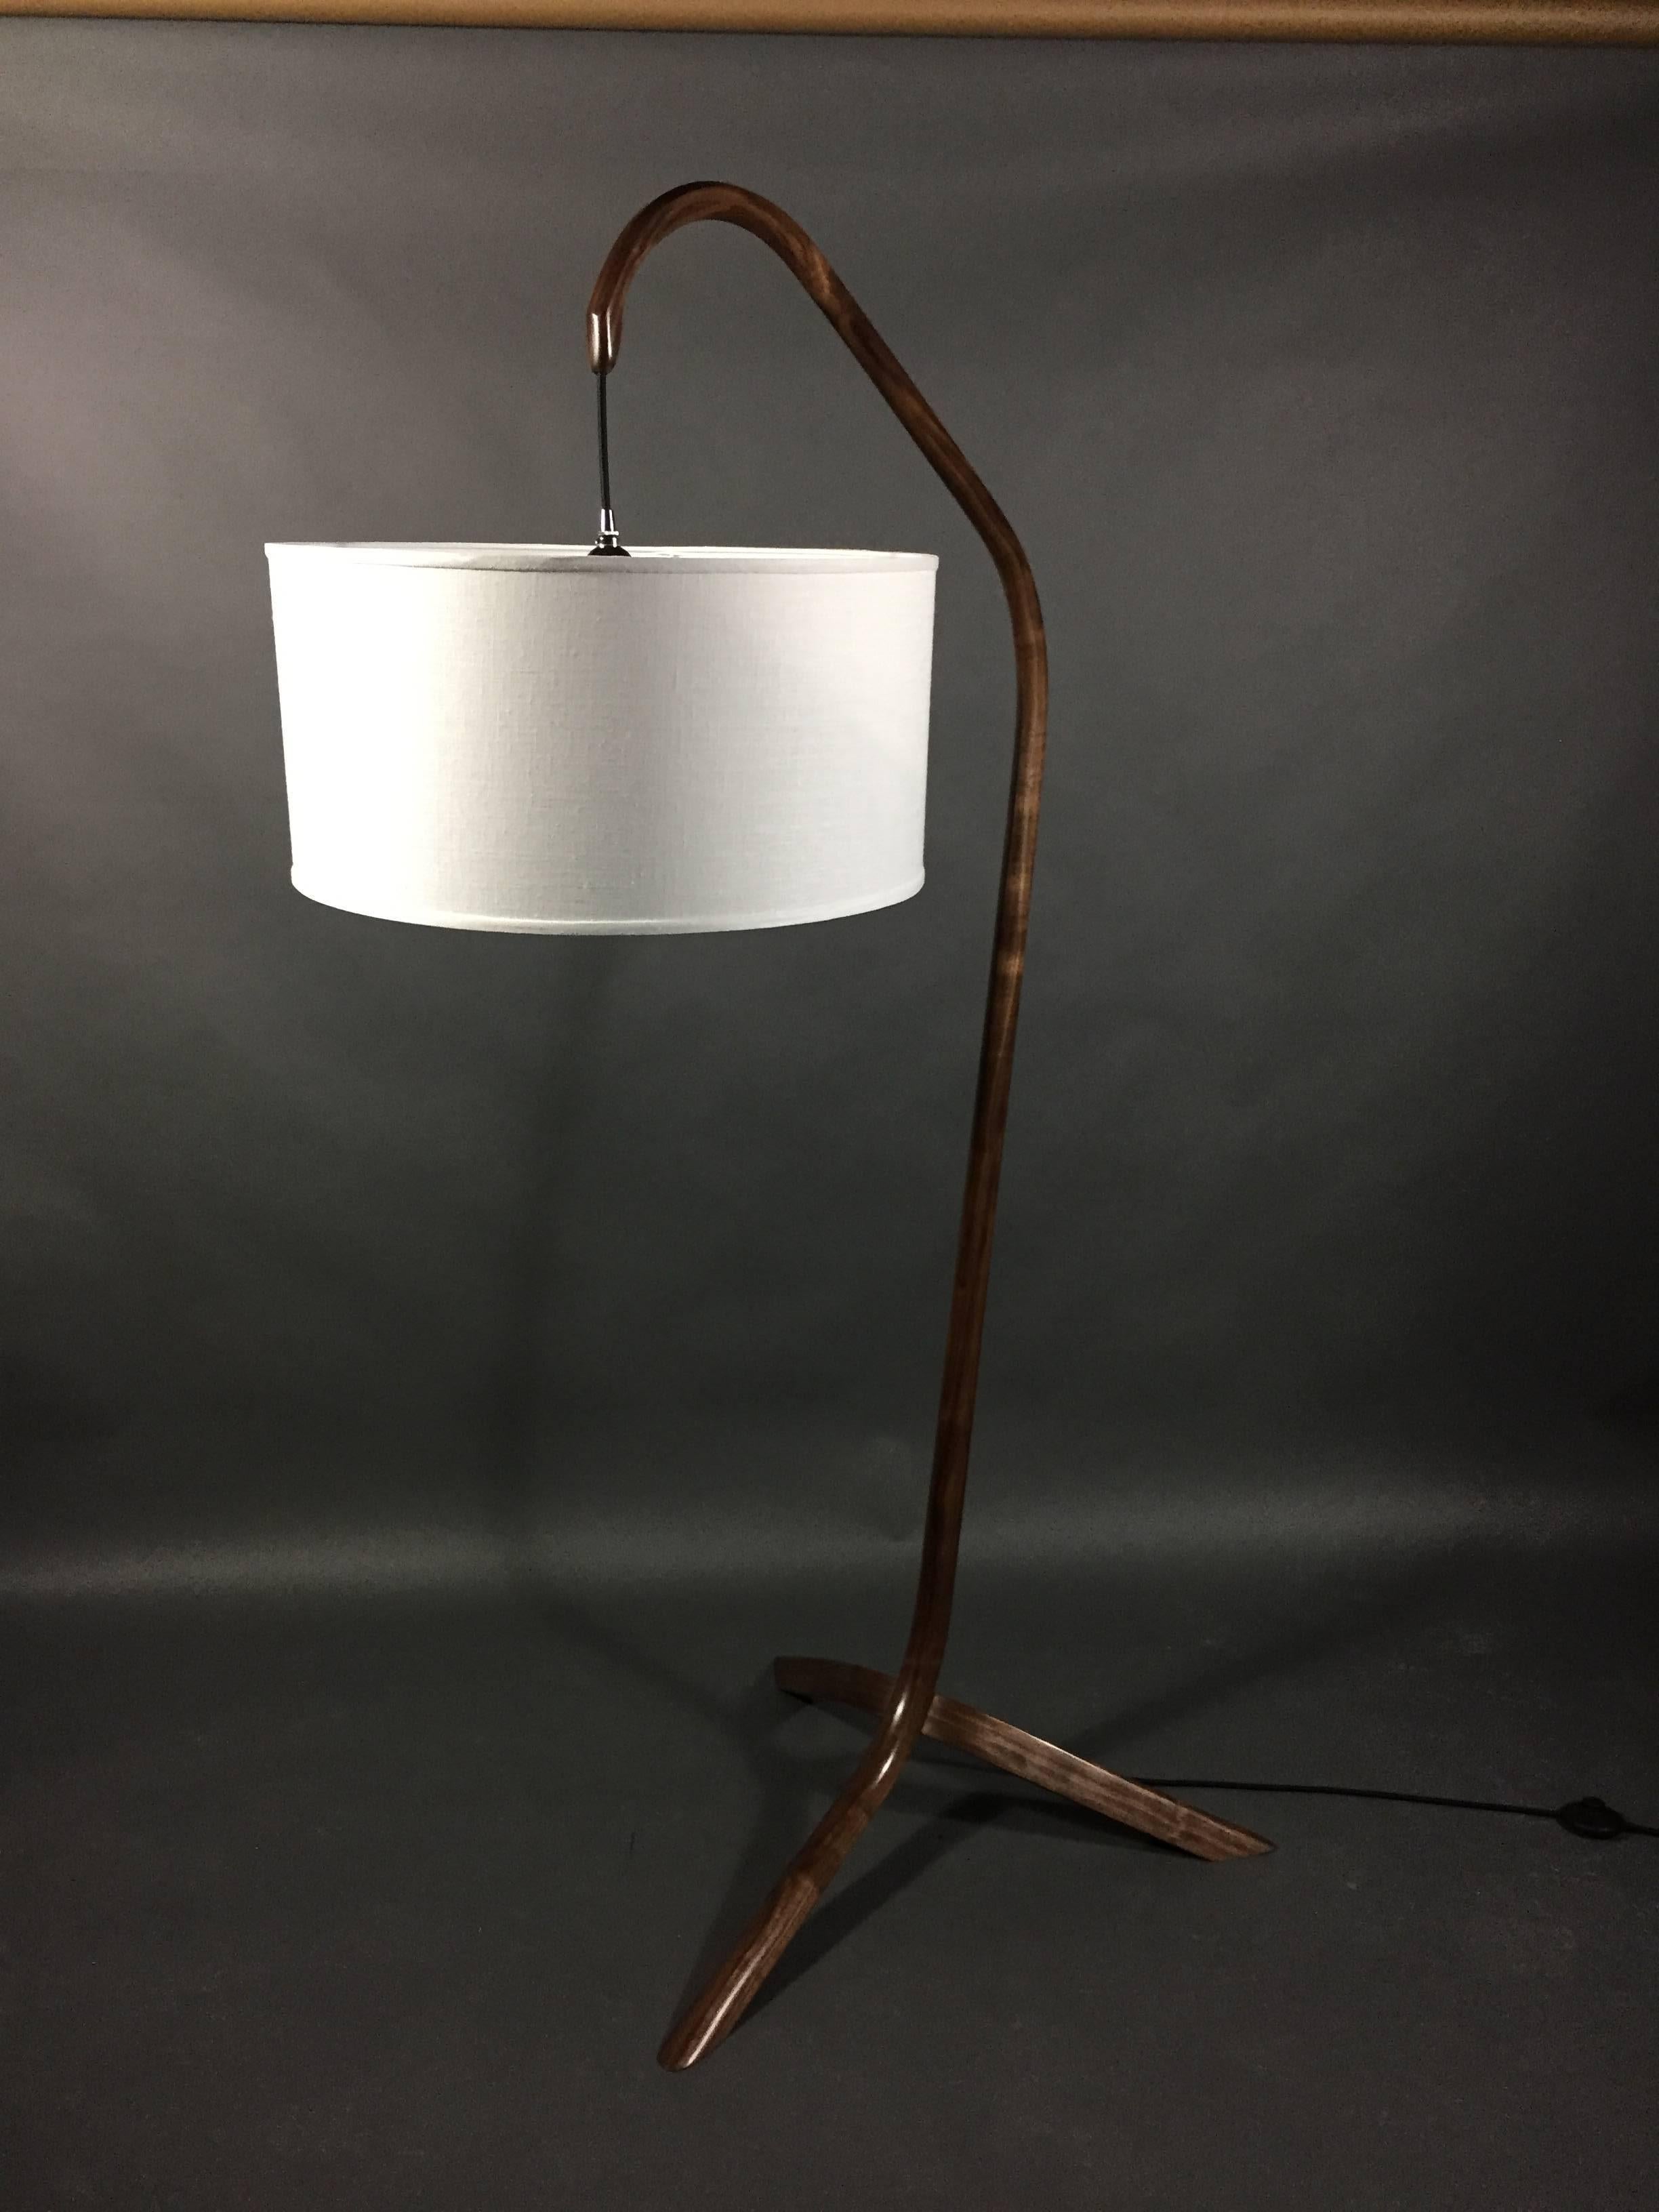 Contemporary Daniel Oates Steambent Floor Lamp in Walnut, 21st Century, USA For Sale